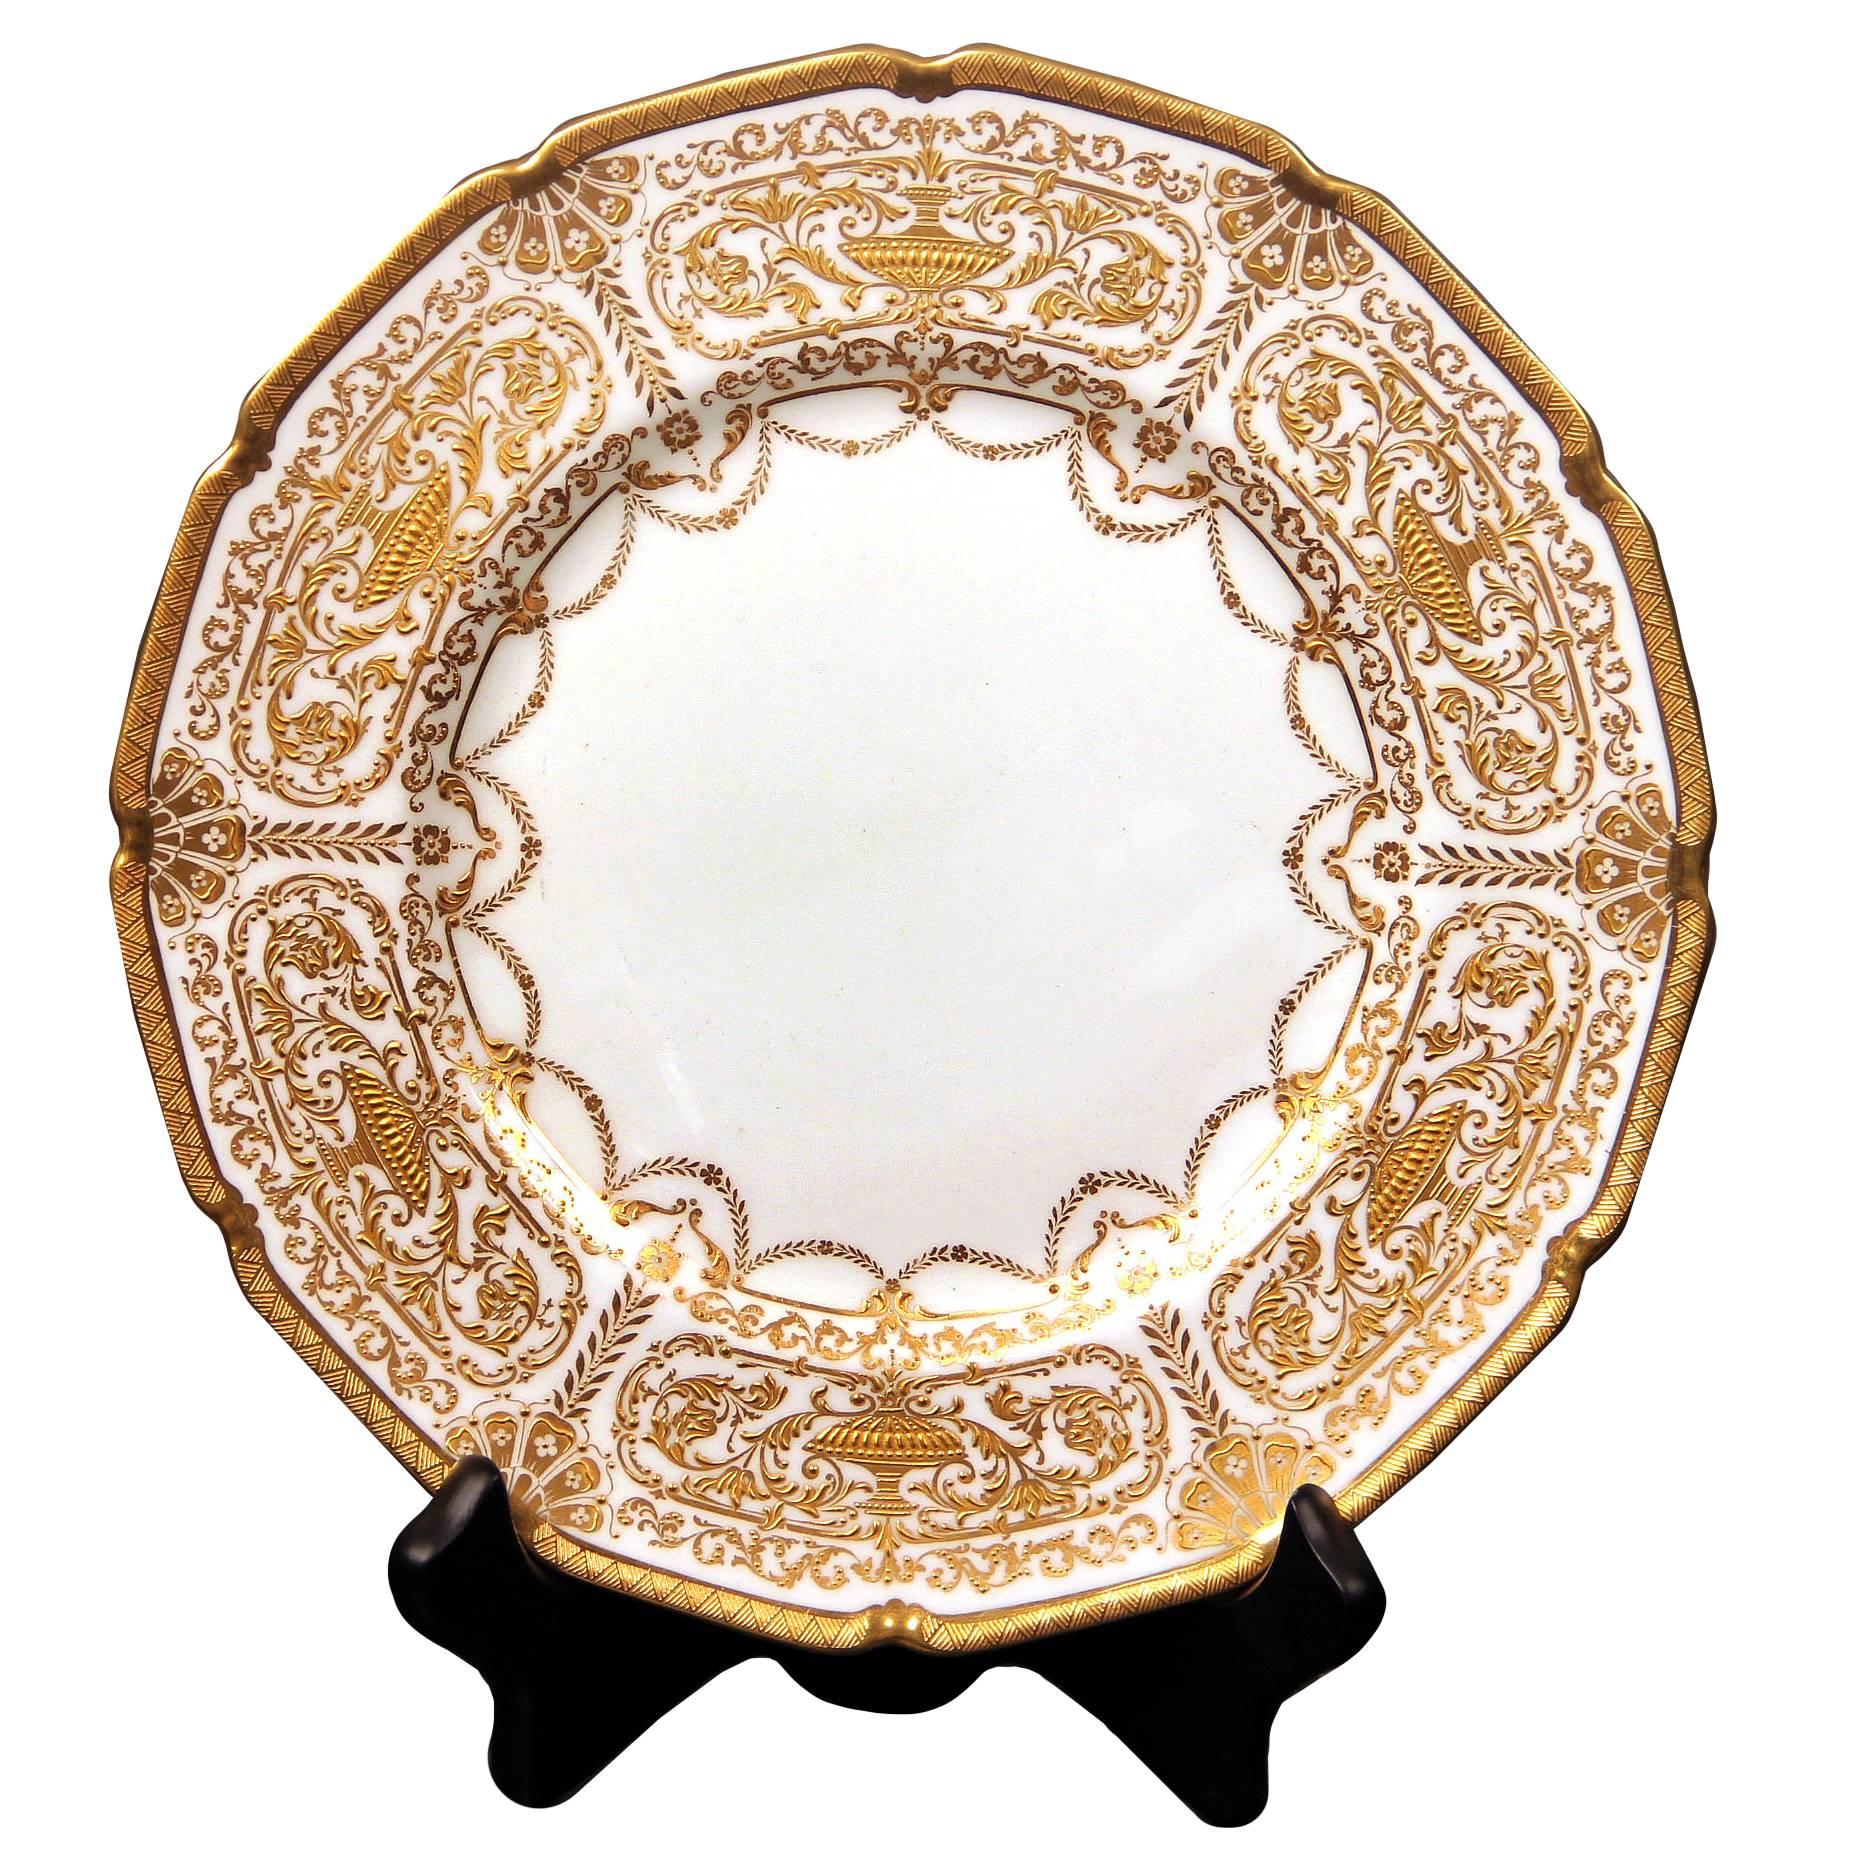 A beautiful set of 12 early 20th century English Royal Doulton plates.

Finely decorated with raised gold.

Stamped Royal Doulton England on the back of the plates.